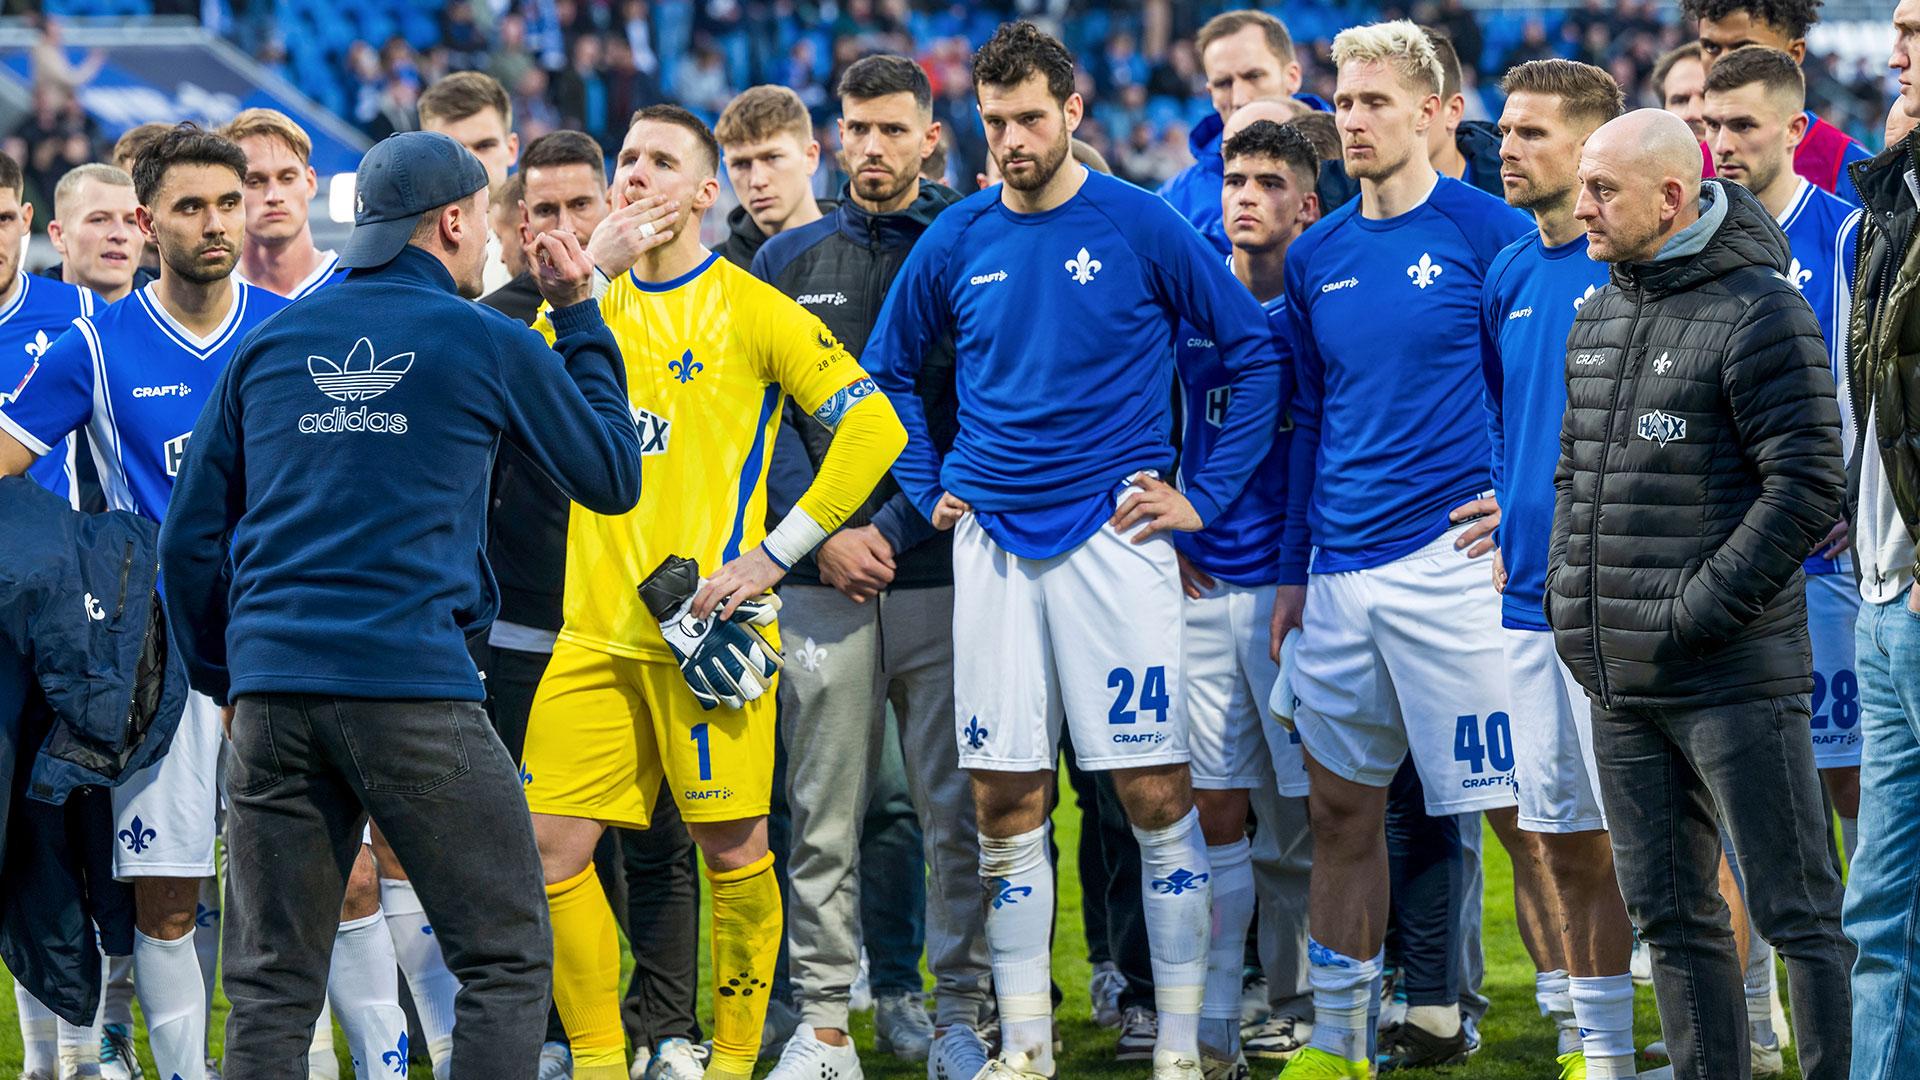 Darmstadt ultras deliver harsh words to players